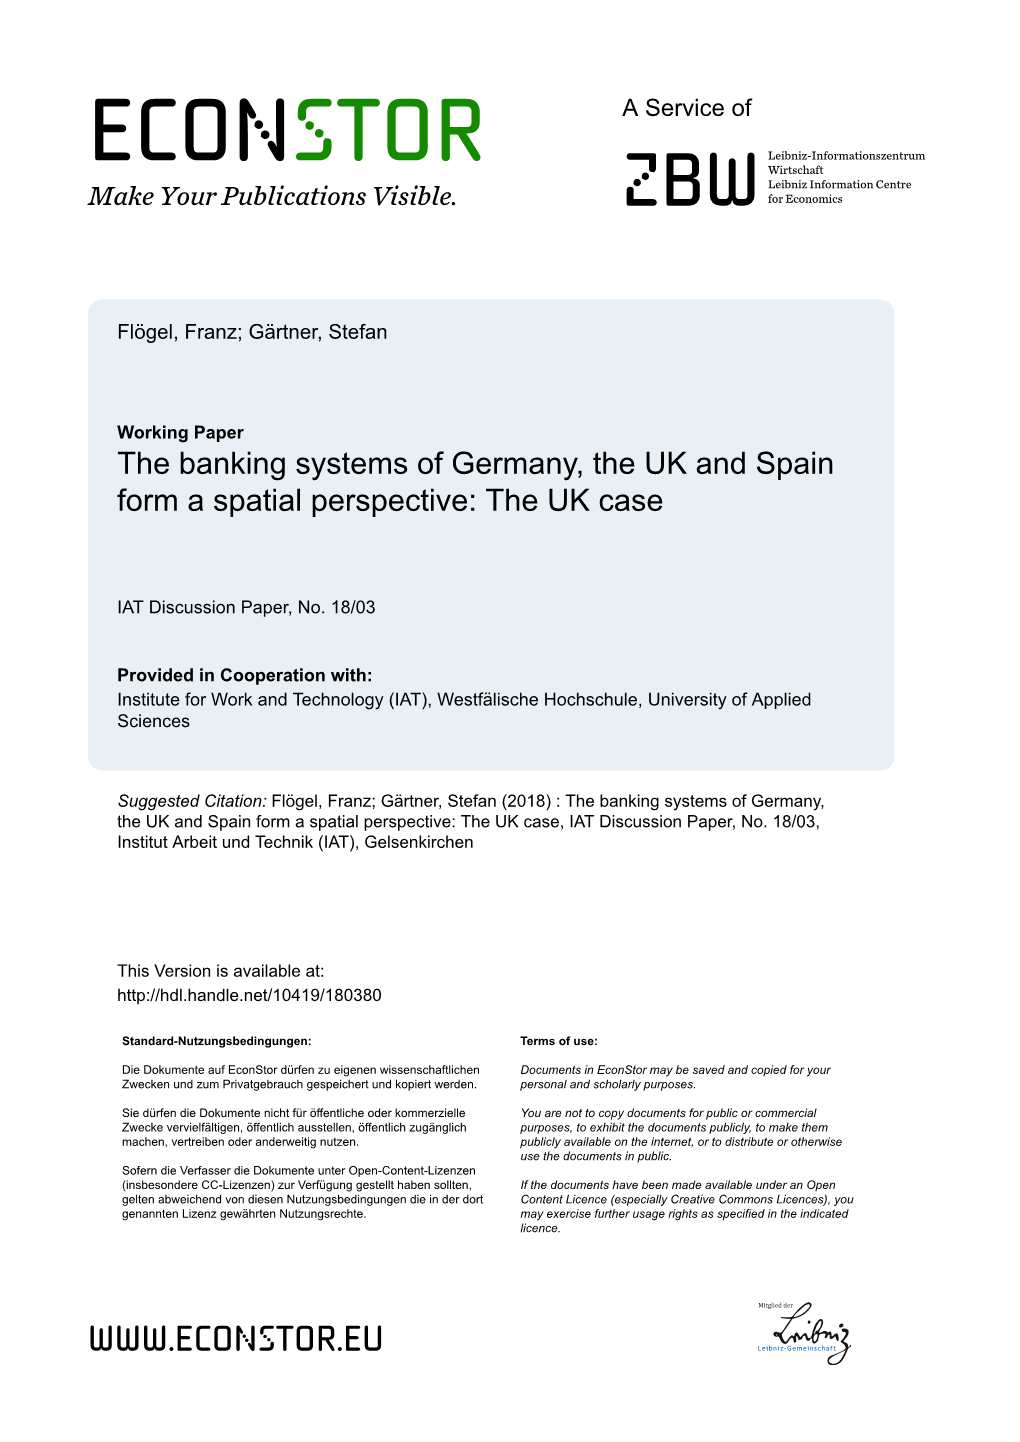 The Banking Systems of Germany, the UK and Spain Form a Spatial Perspective: the UK Case